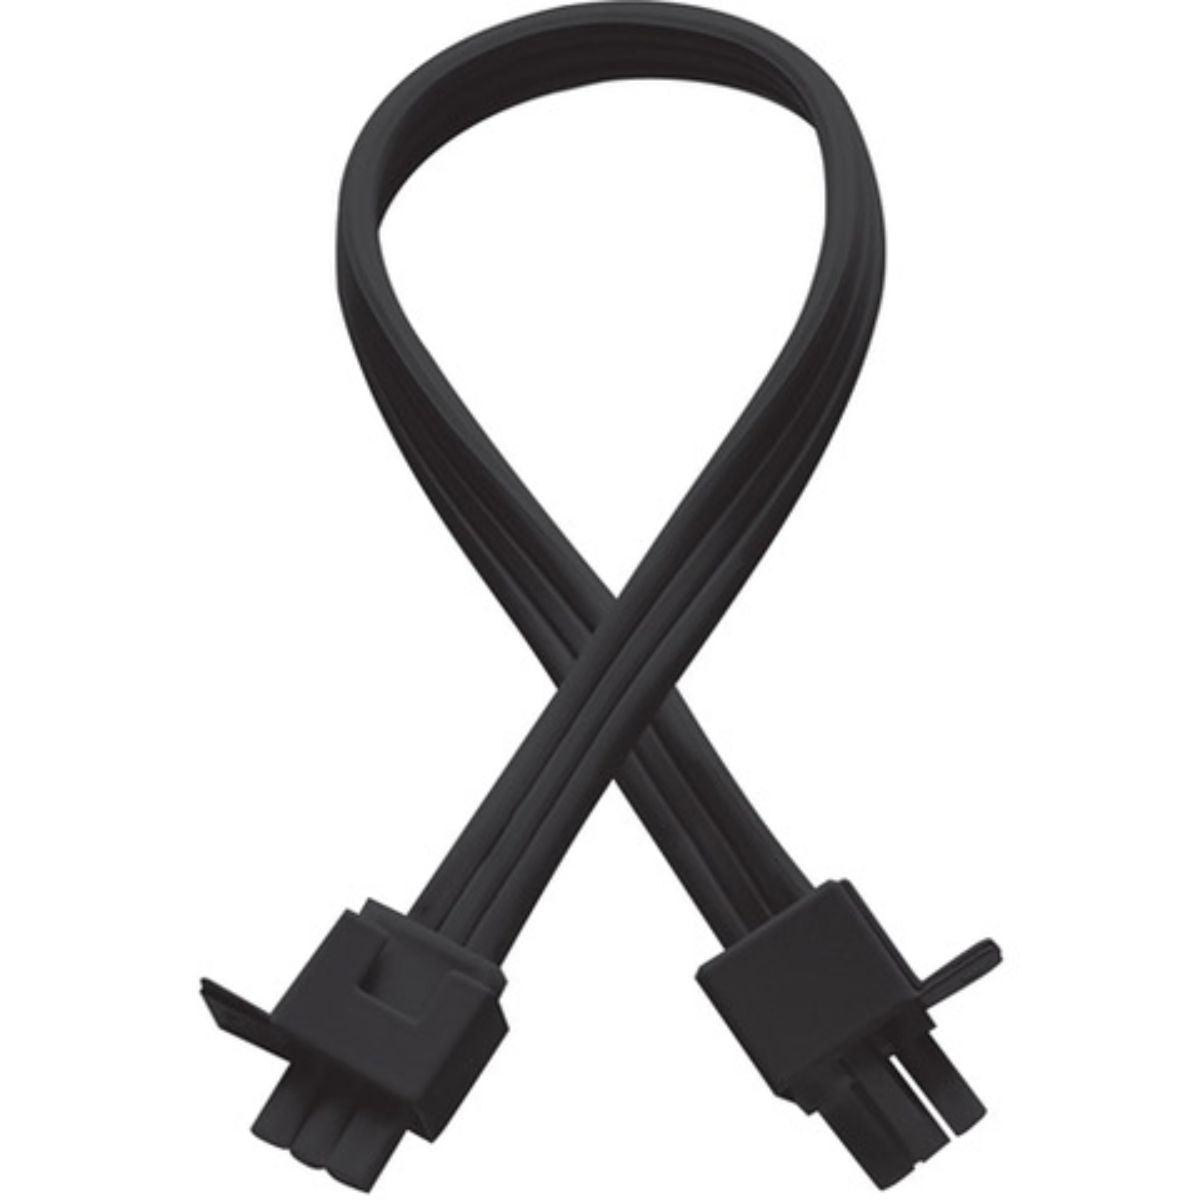 36in. Interconnect Cable For Undercabinet Lights, Black Finish - Bees Lighting